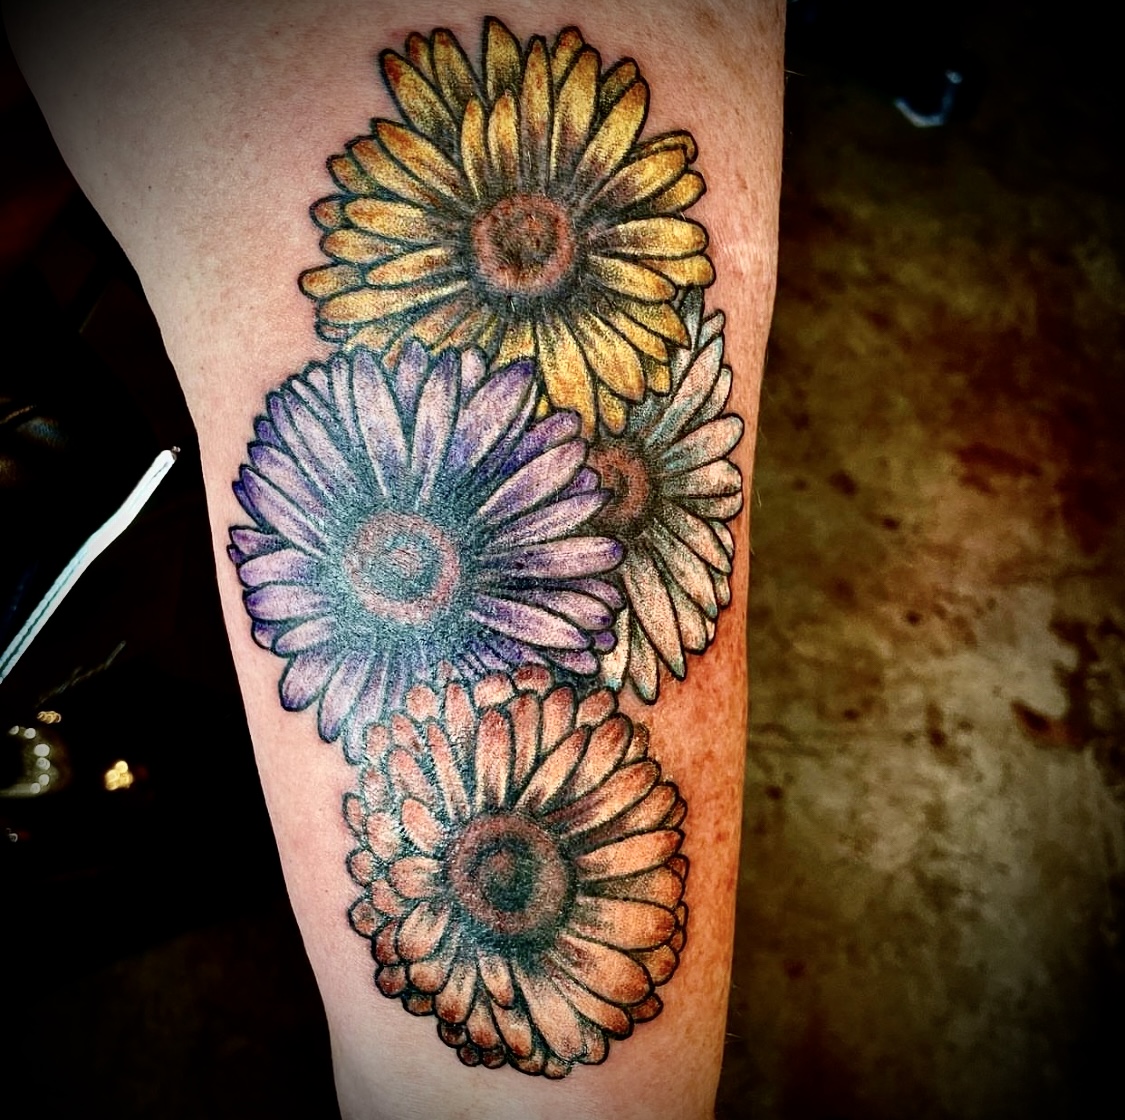 Tattoo of colorful flowers from top tattoo shop in Dallas Texas